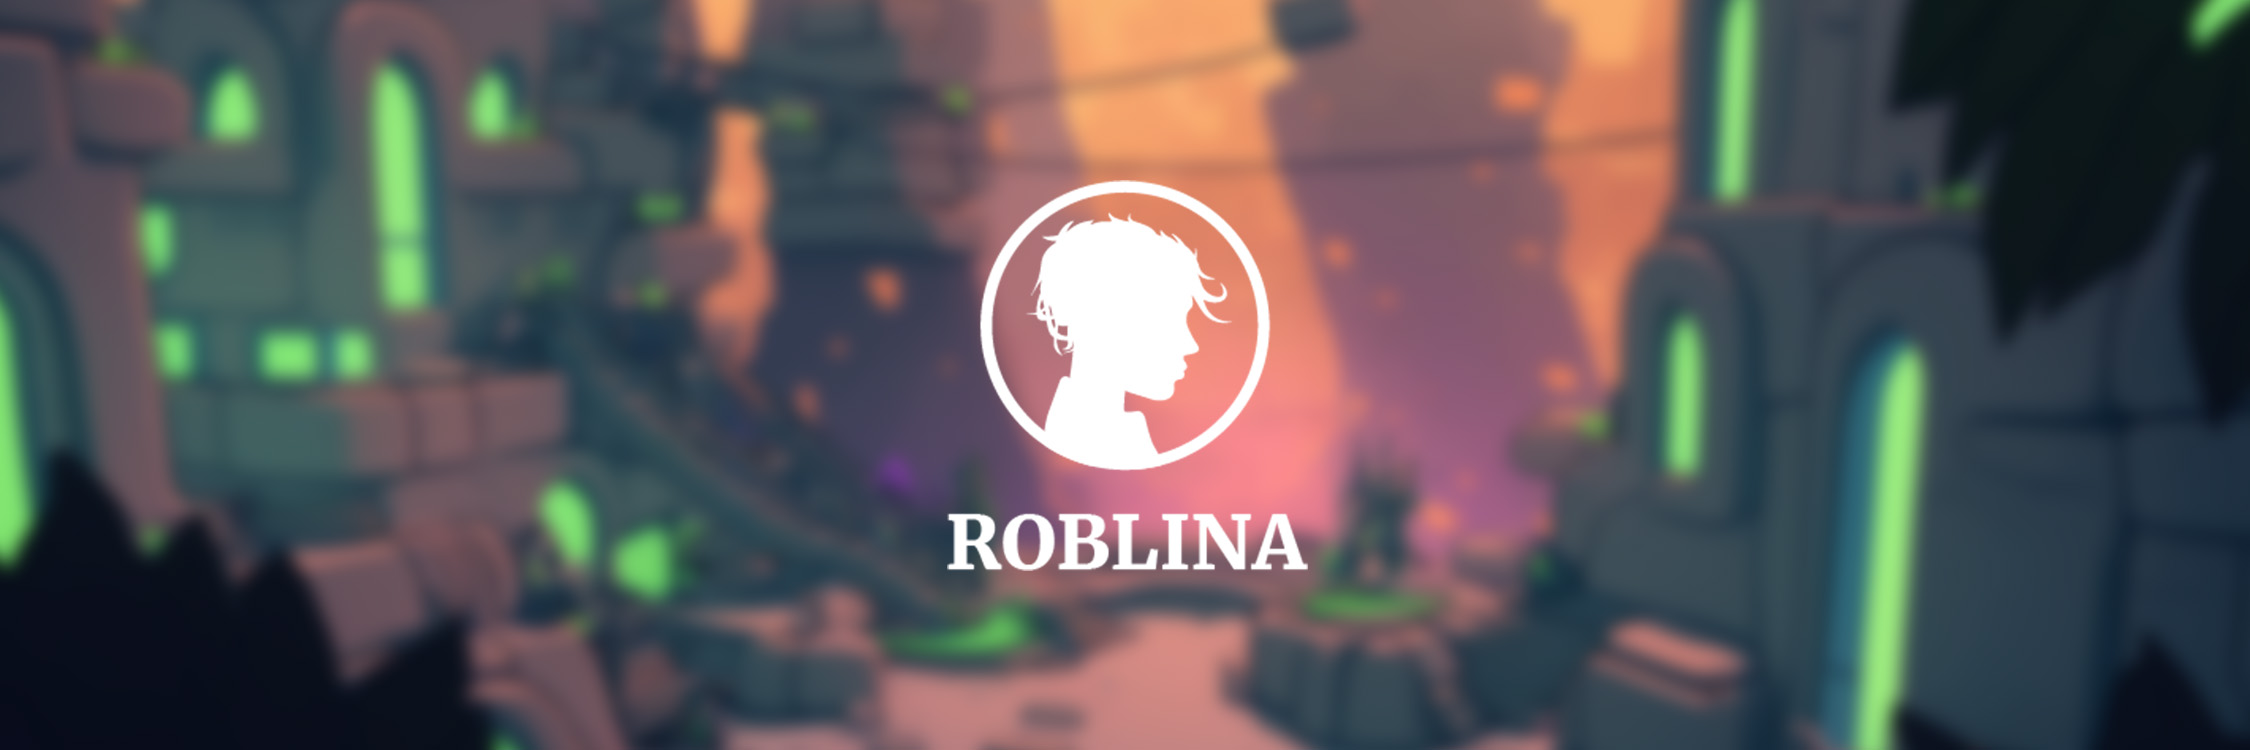 Roblina Banner with Art Background